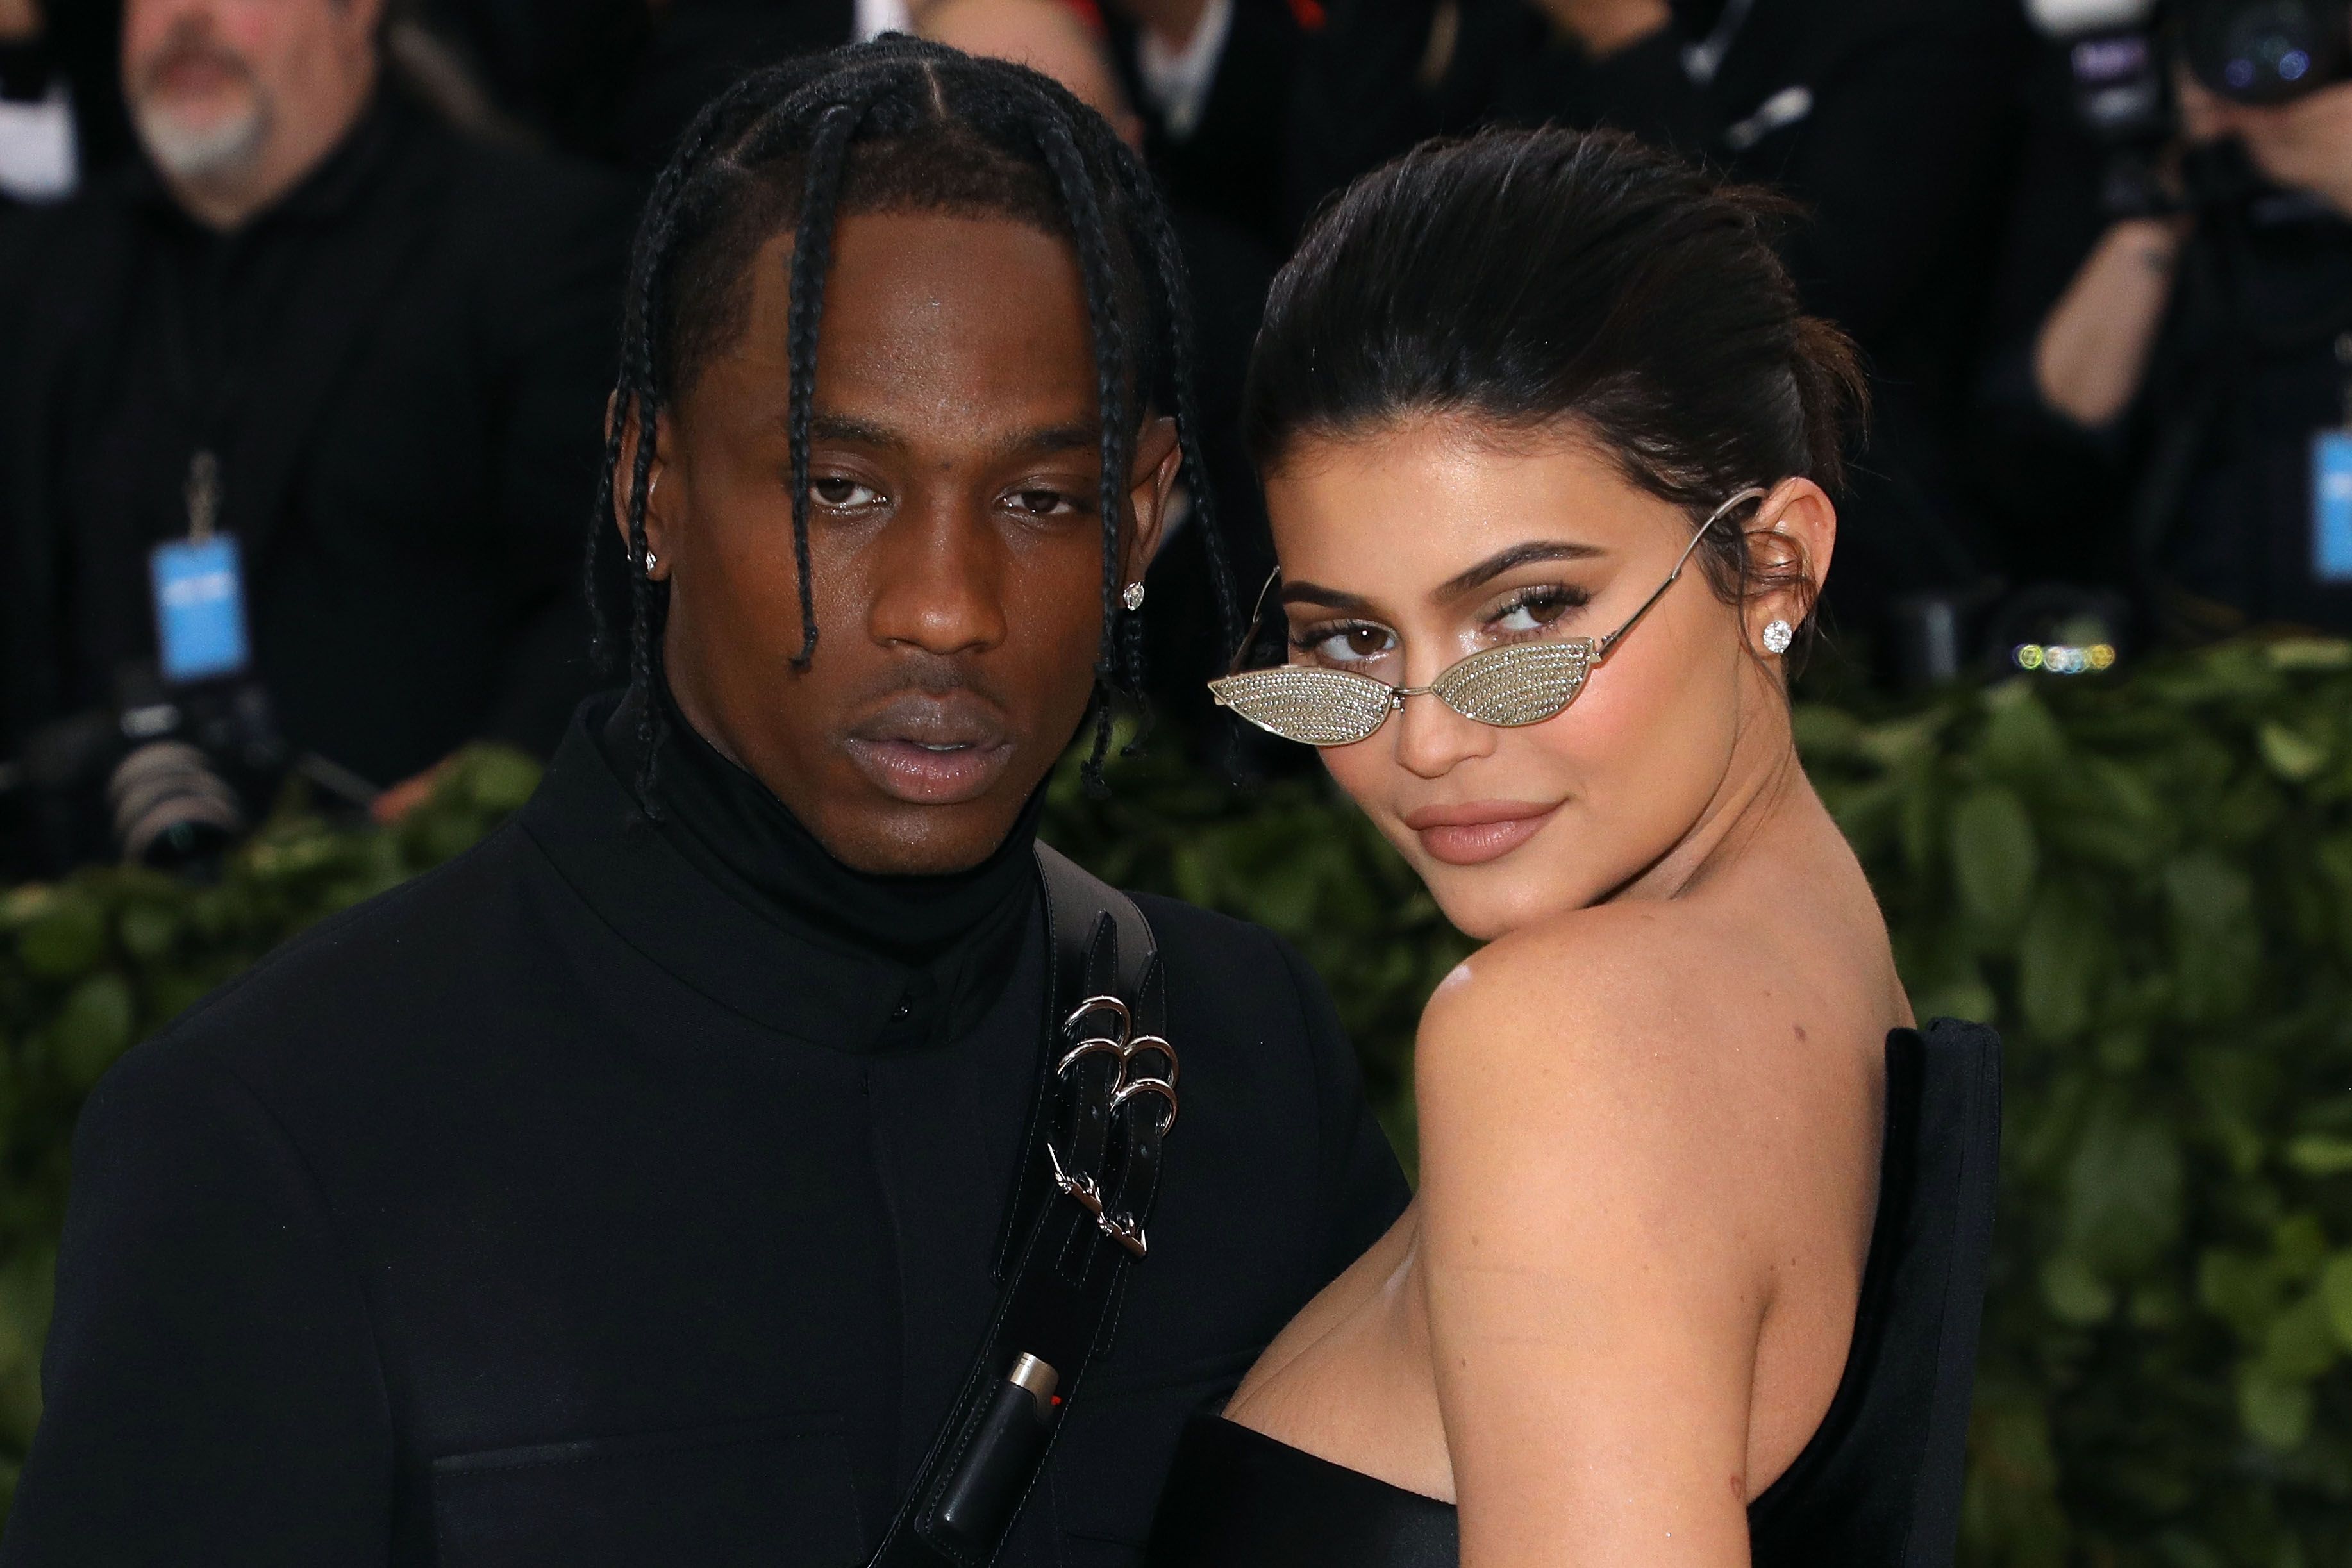 Travis Scott and Kylie Jenner at the "Heavenly Bodies: Fashion & the Catholic Imagination" on May 7, 2018 in New York City | Photo: Getty Images